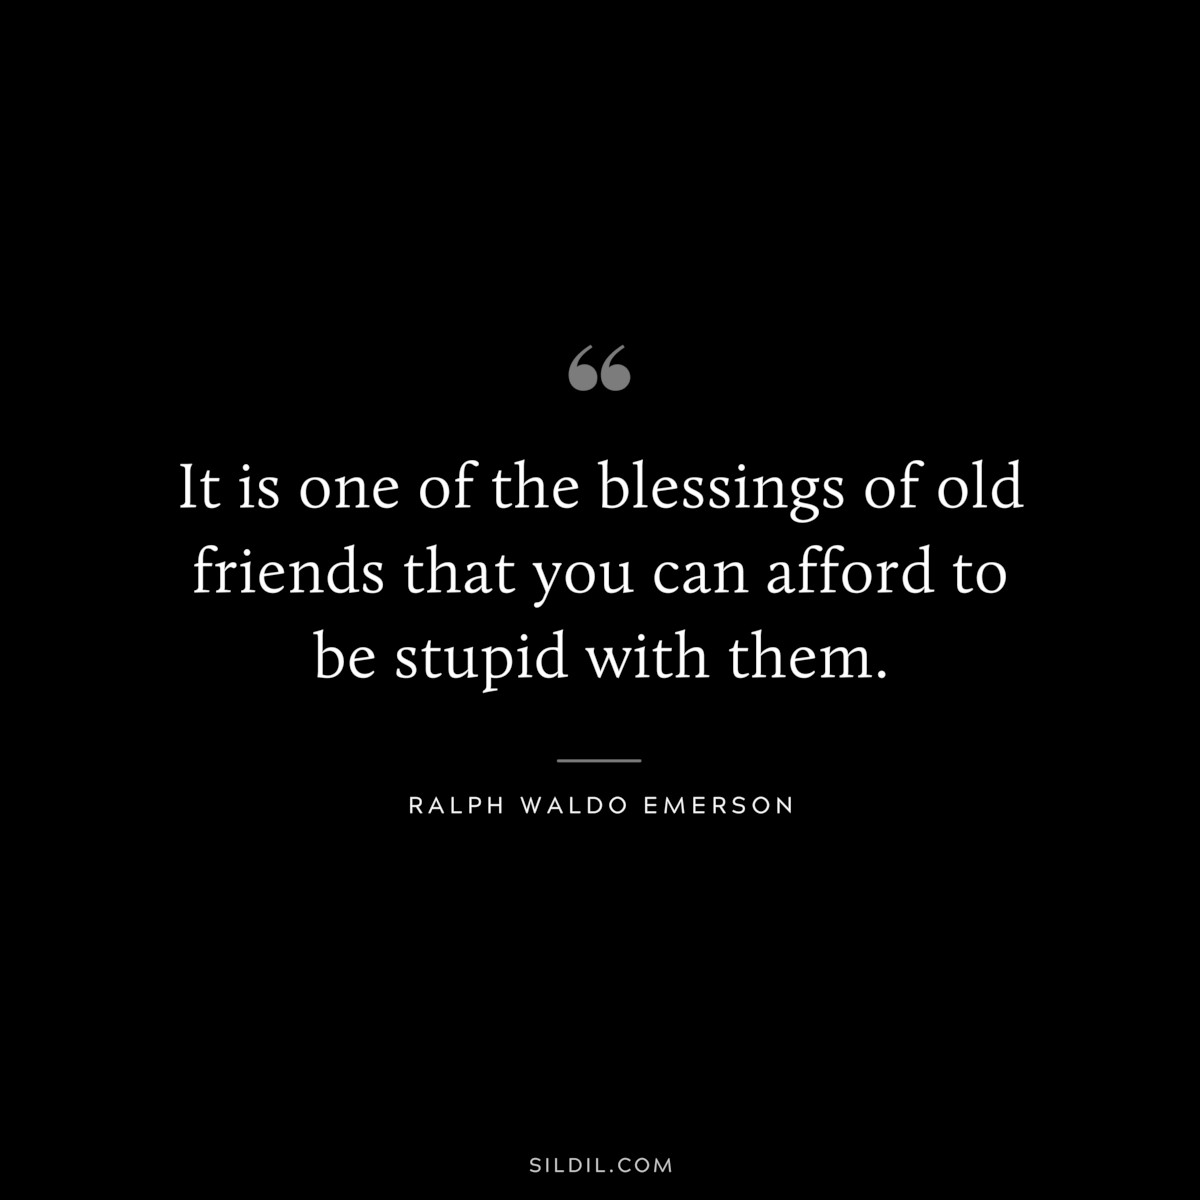 It is one of the blessings of old friends that you can afford to be stupid with them. — Ralph Waldo Emerson